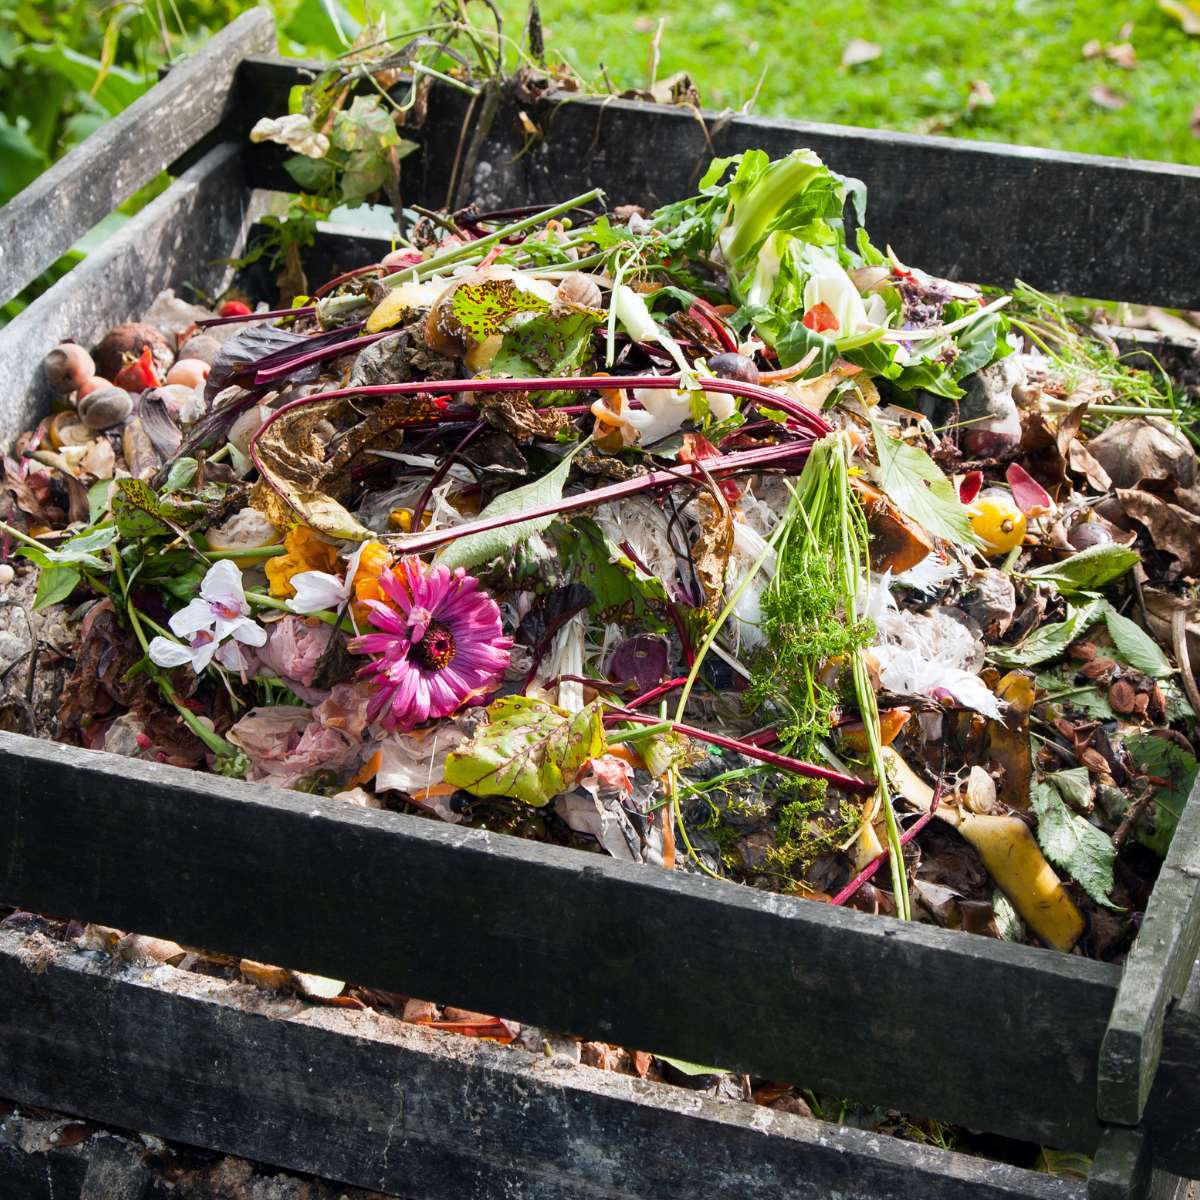 A pallet-bin used for garden compost.